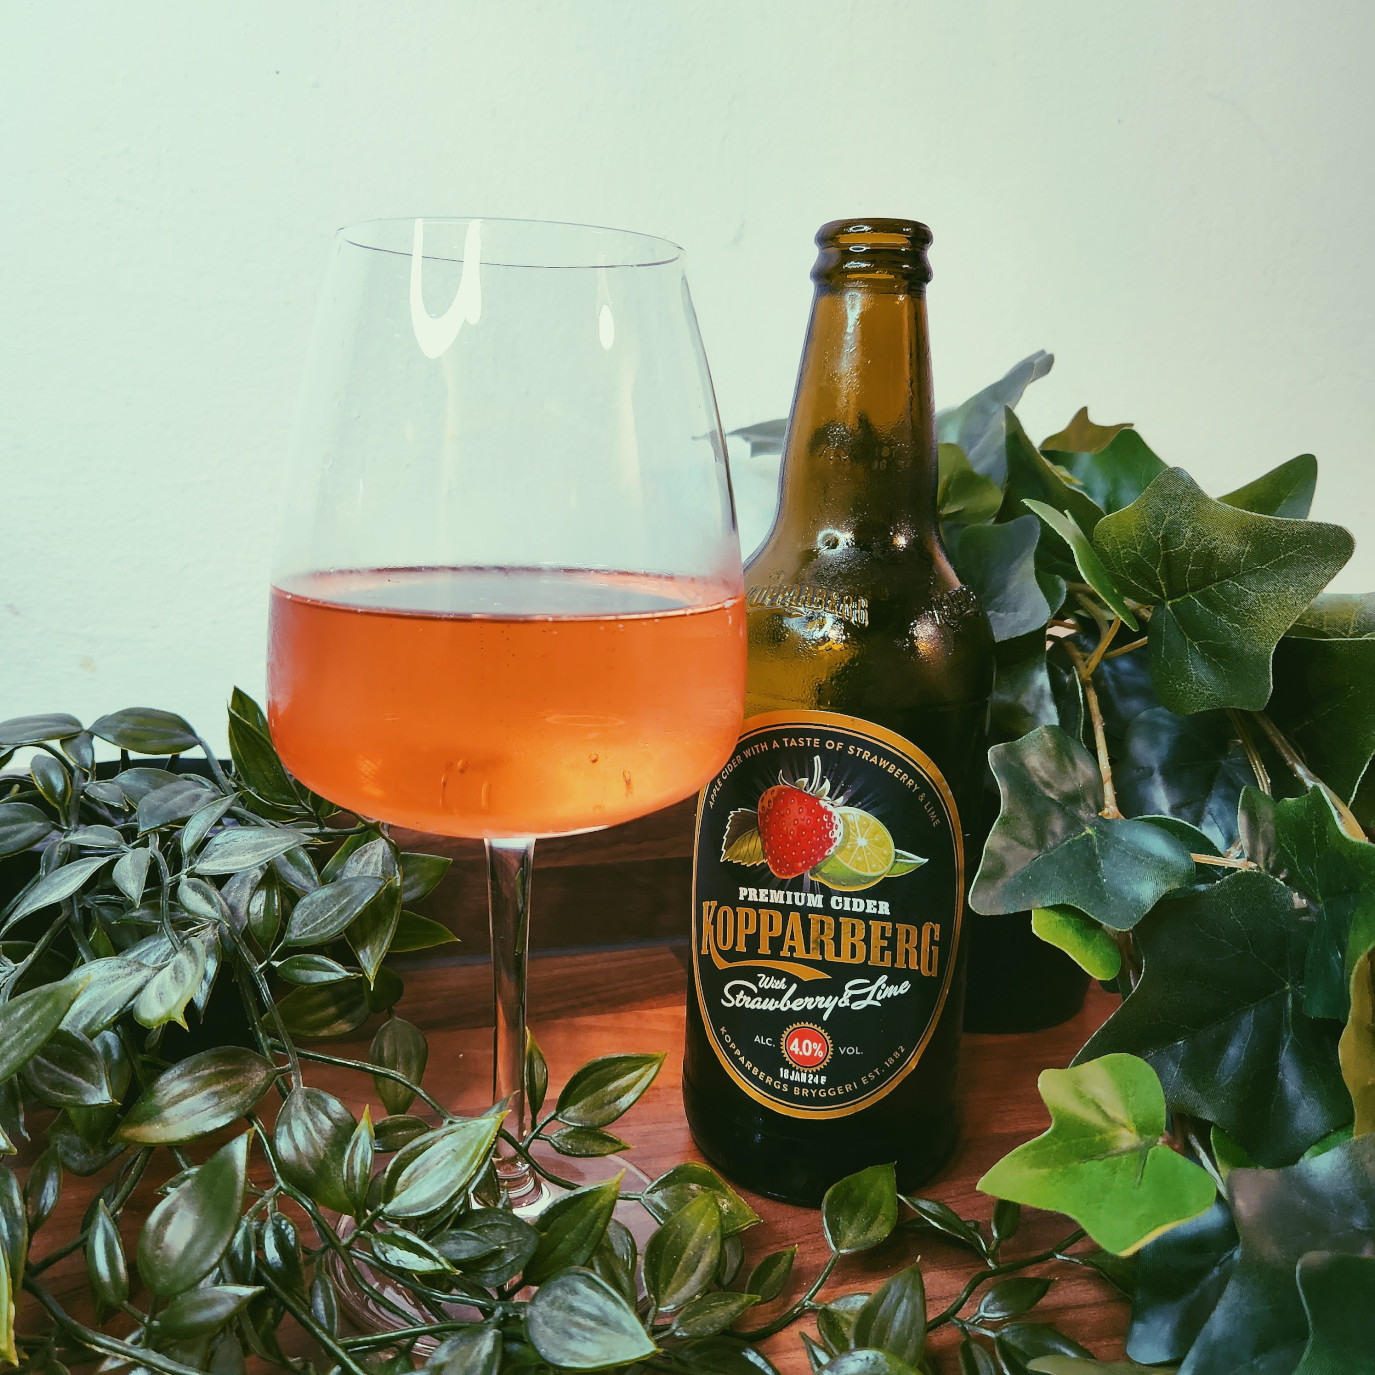 kopparberg strawberry and lime fruit cider bottle next to a wine glass filled with the strawberry pink cider.